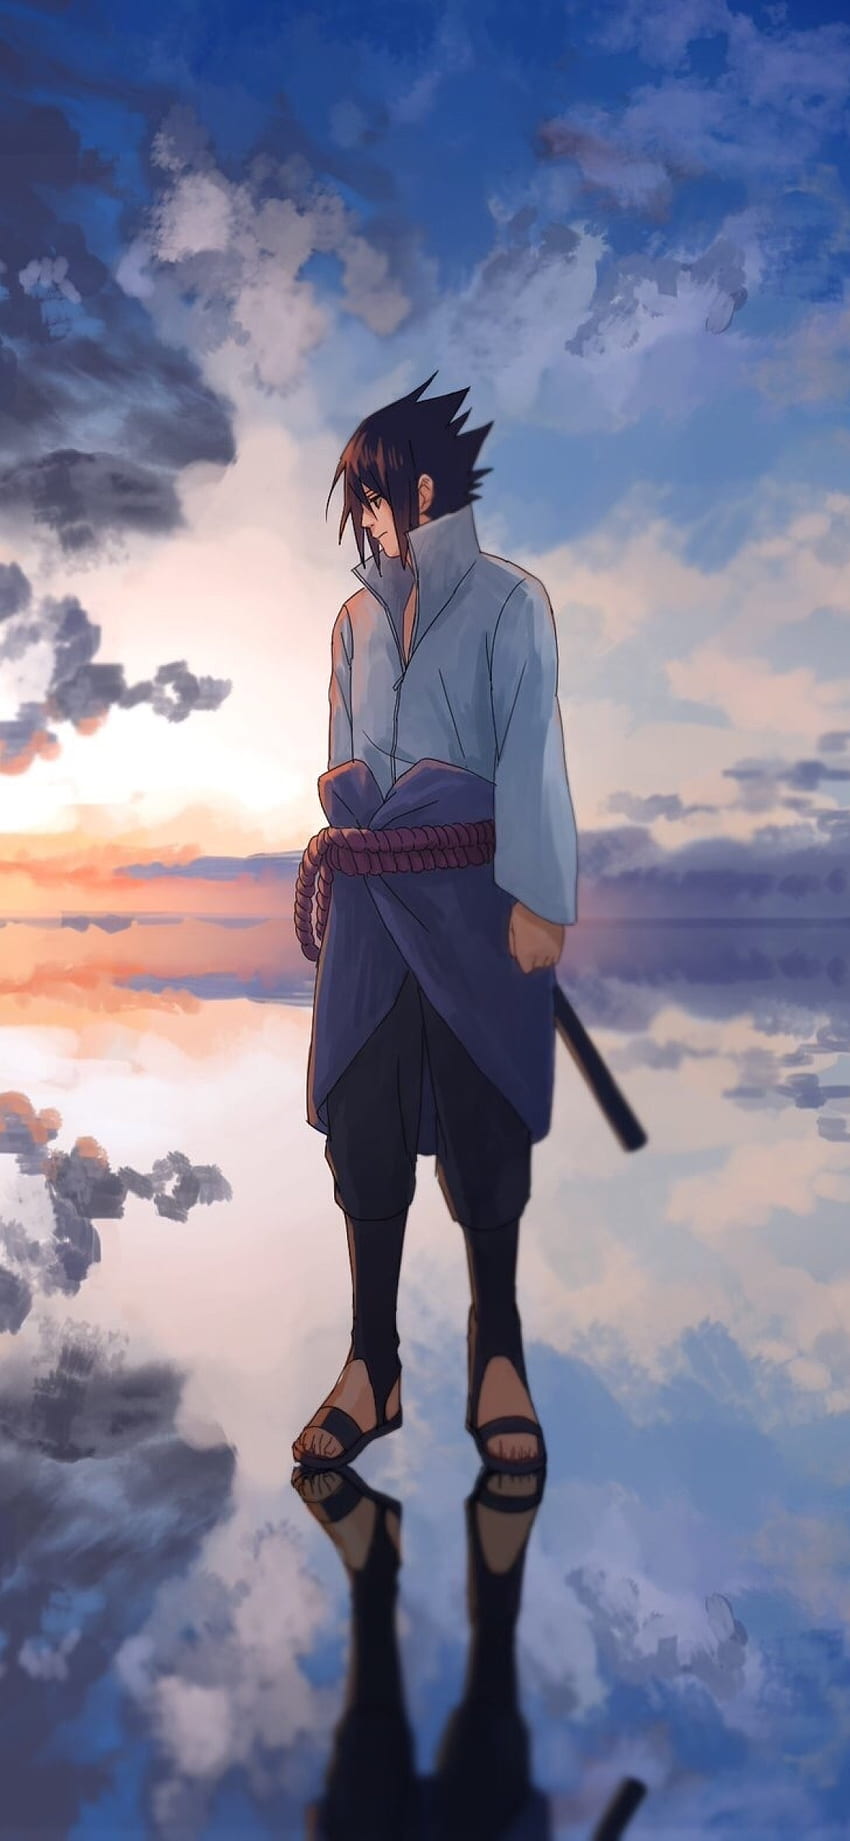 Look At Sasukes Outfit From The Back  Naruto Wallpaper Iphone Transparent  PNG  493x908  Free Download on NicePNG